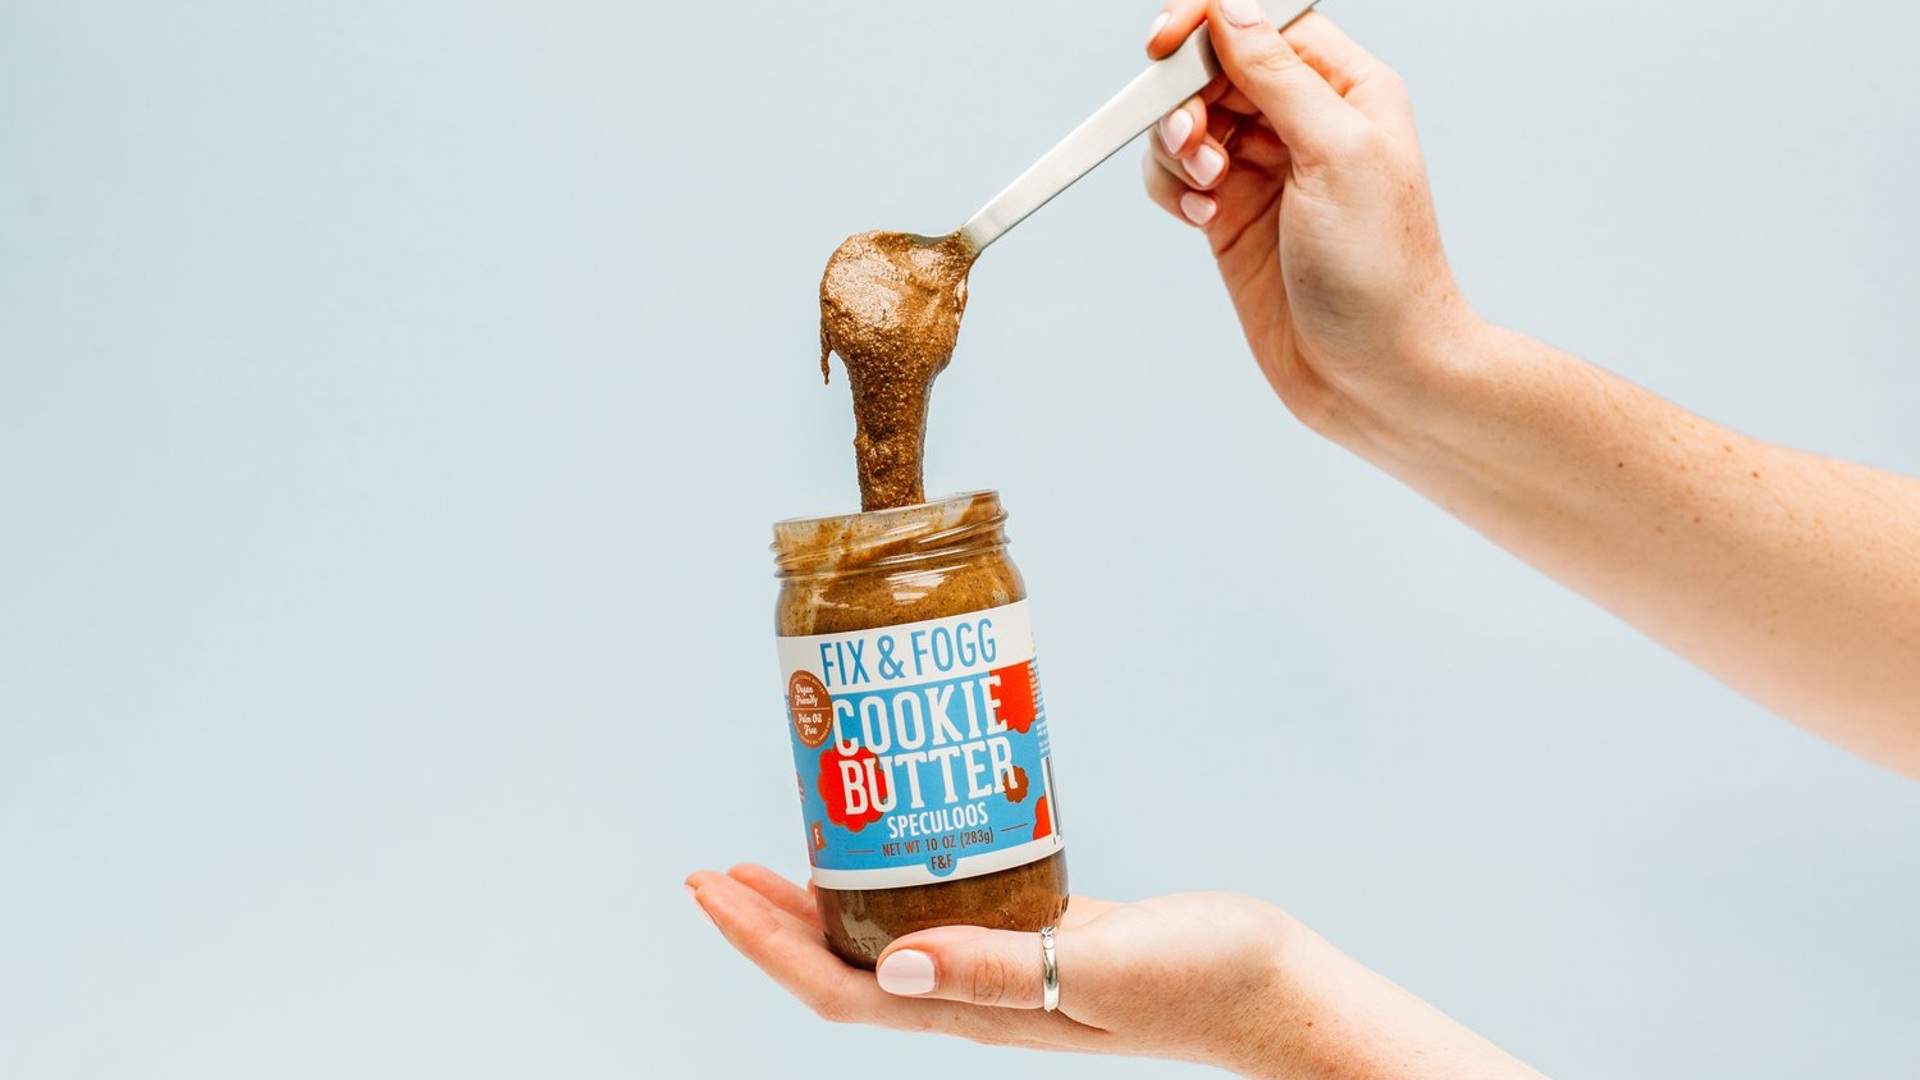 You Can Get Your Hands on Fix and Fogg's New Cookie Butter Again After a Record-Breaking Sell Out